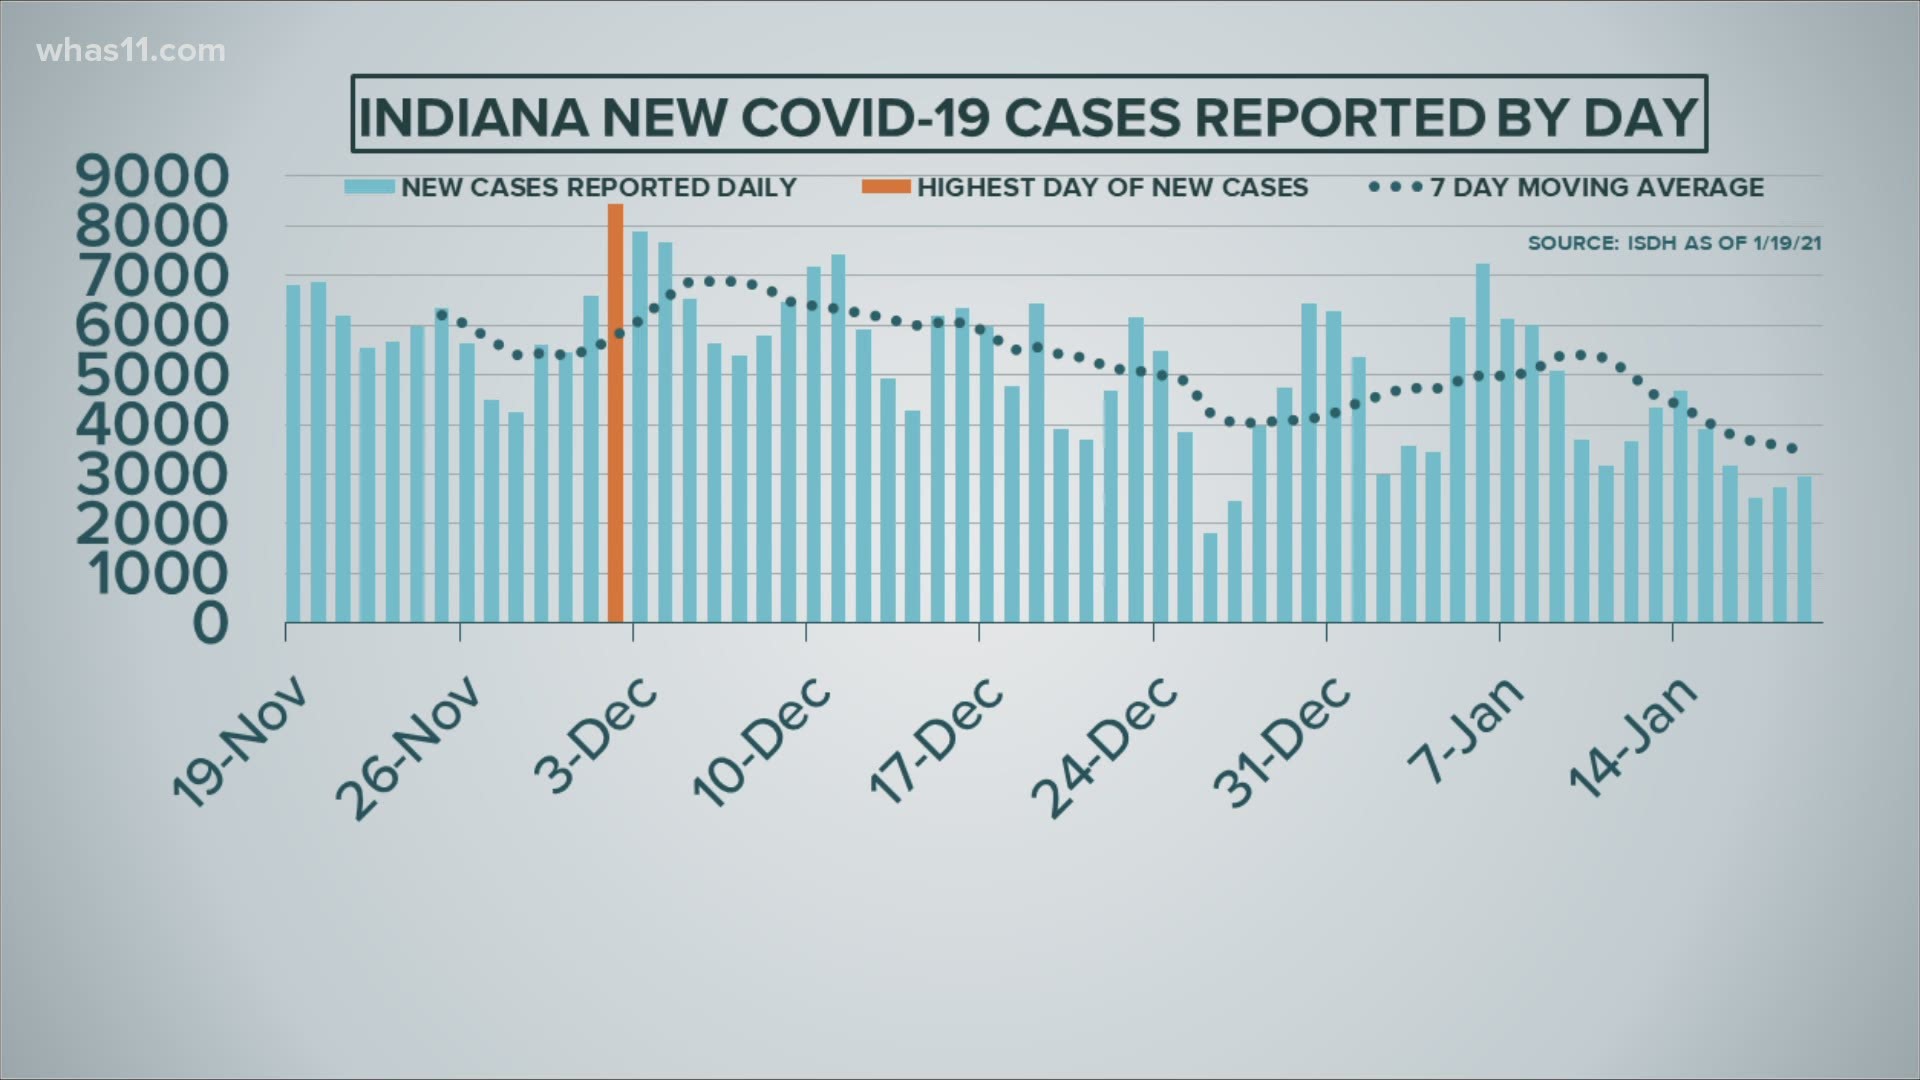 After a post-holiday surge, the average number of cases in Kentucky and Indiana appears to be on the decline.